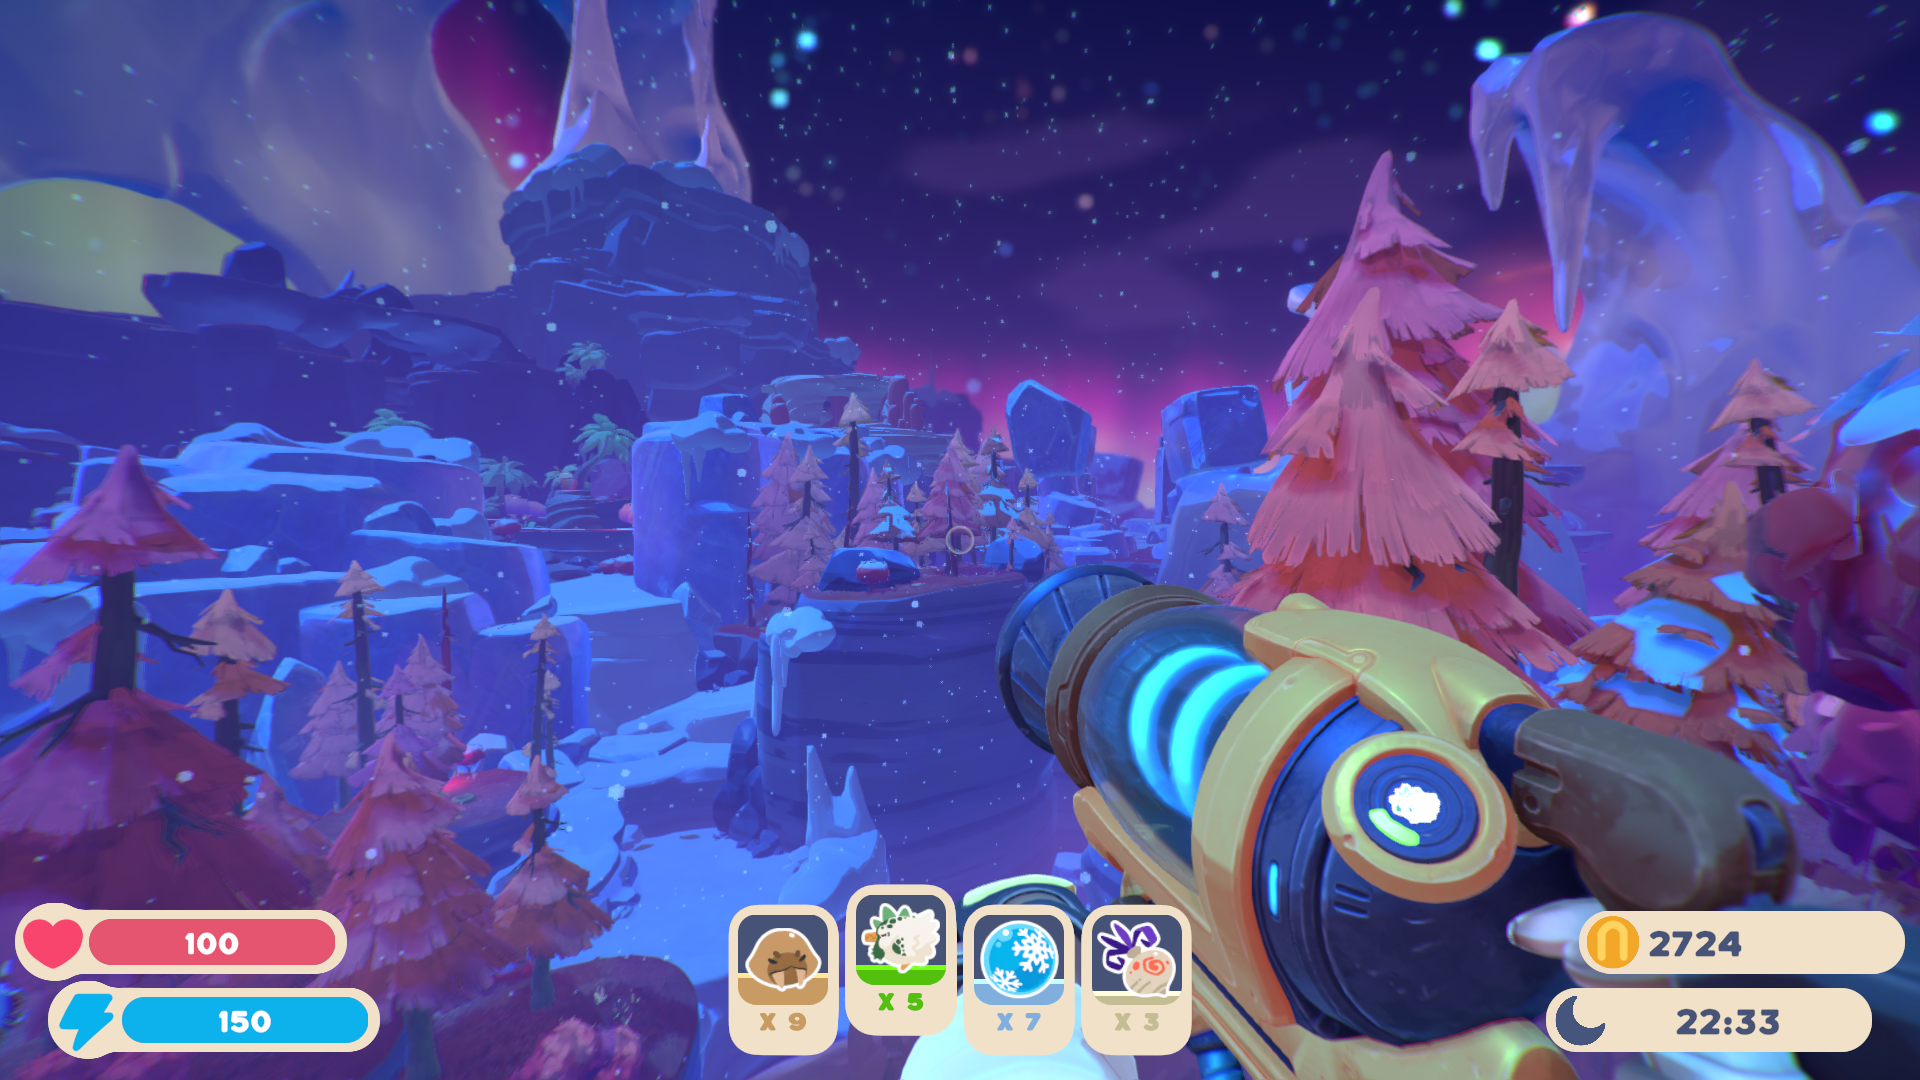 Slime Rancher 2 new update 'Song of the Sabers' out now in Early Access